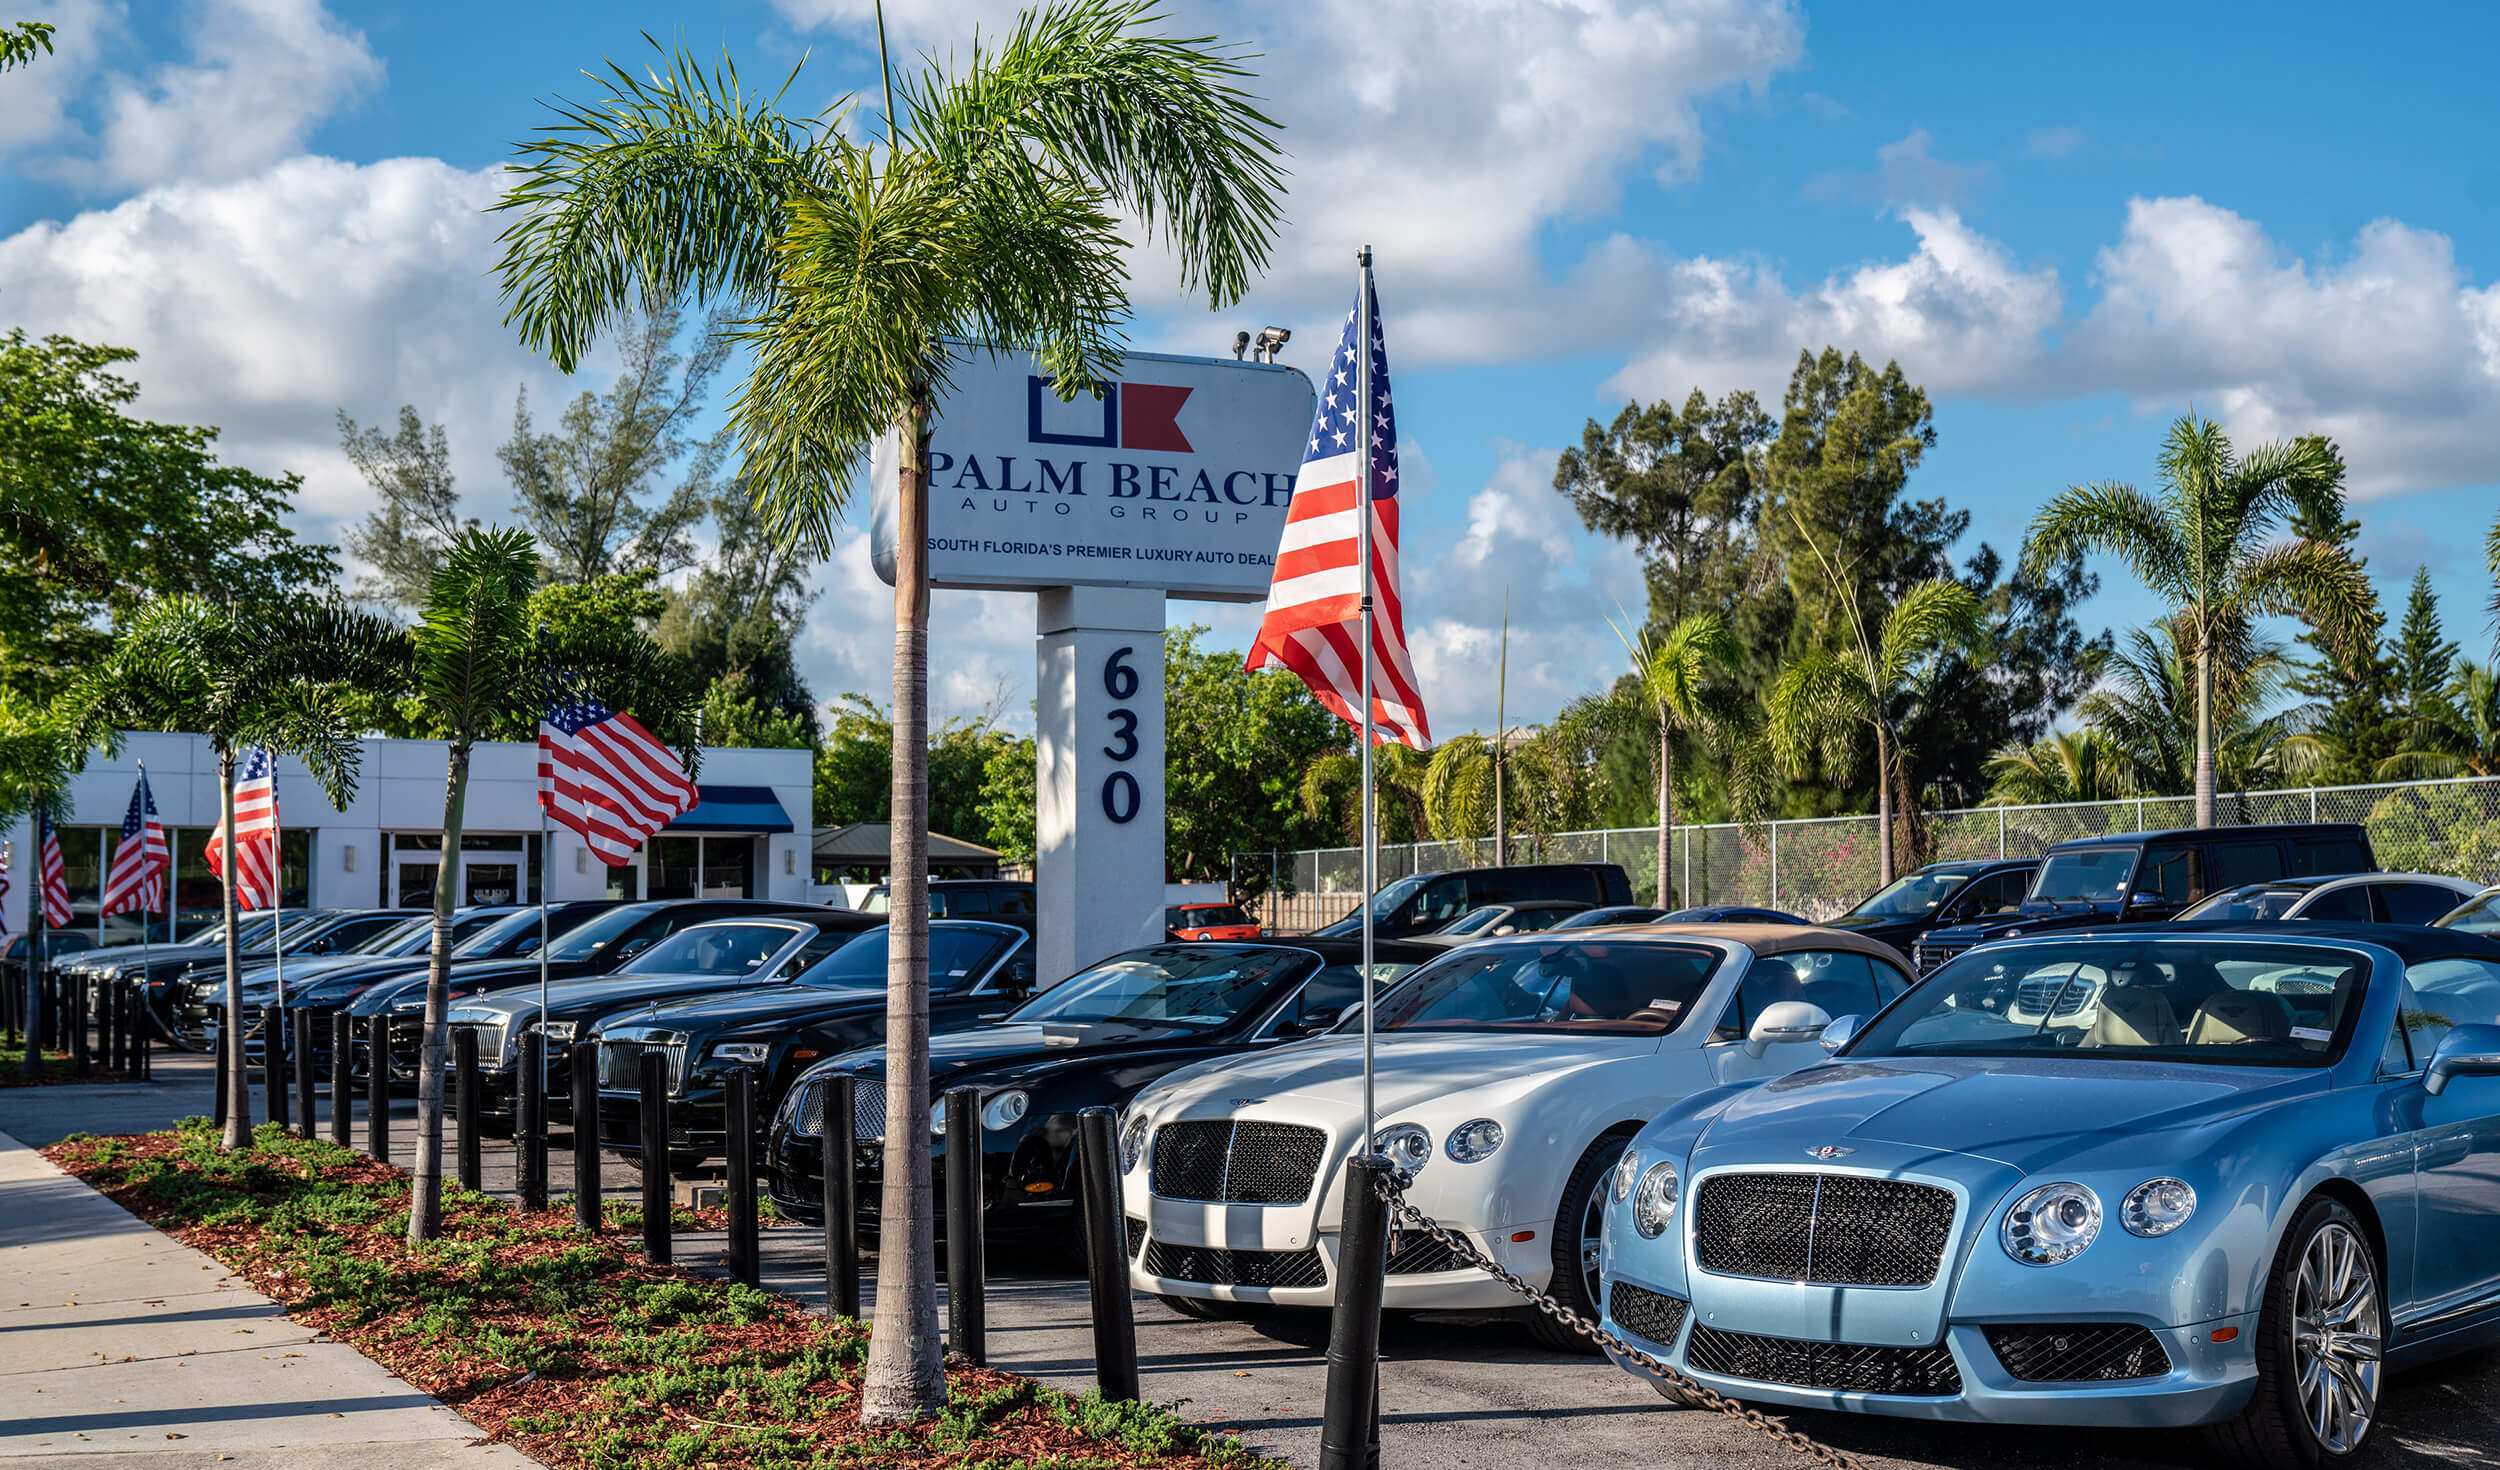 Exterior image of Palm Beach Auto Group dealership: line of cars with flags & palm trees.